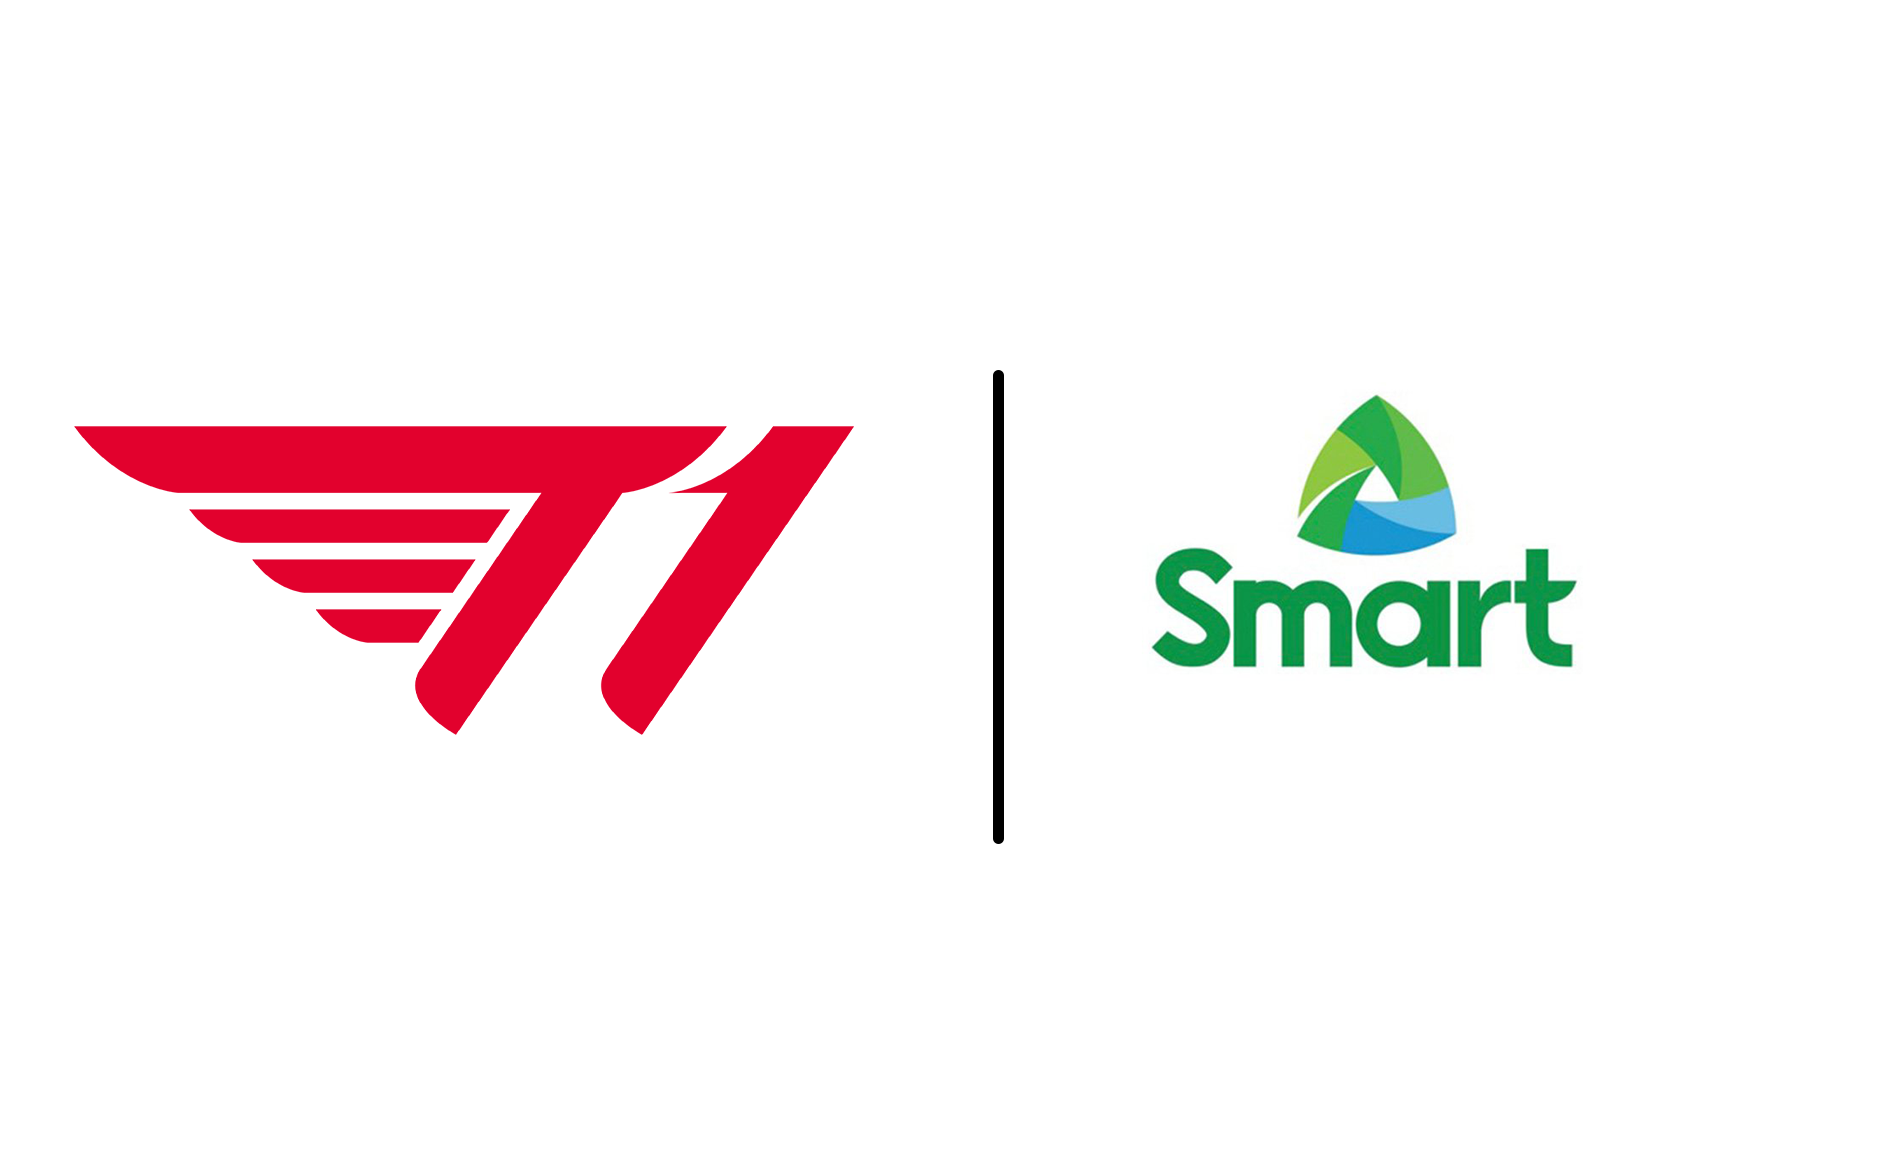 Smart teams up with T1 to bolster Philippines esports scene